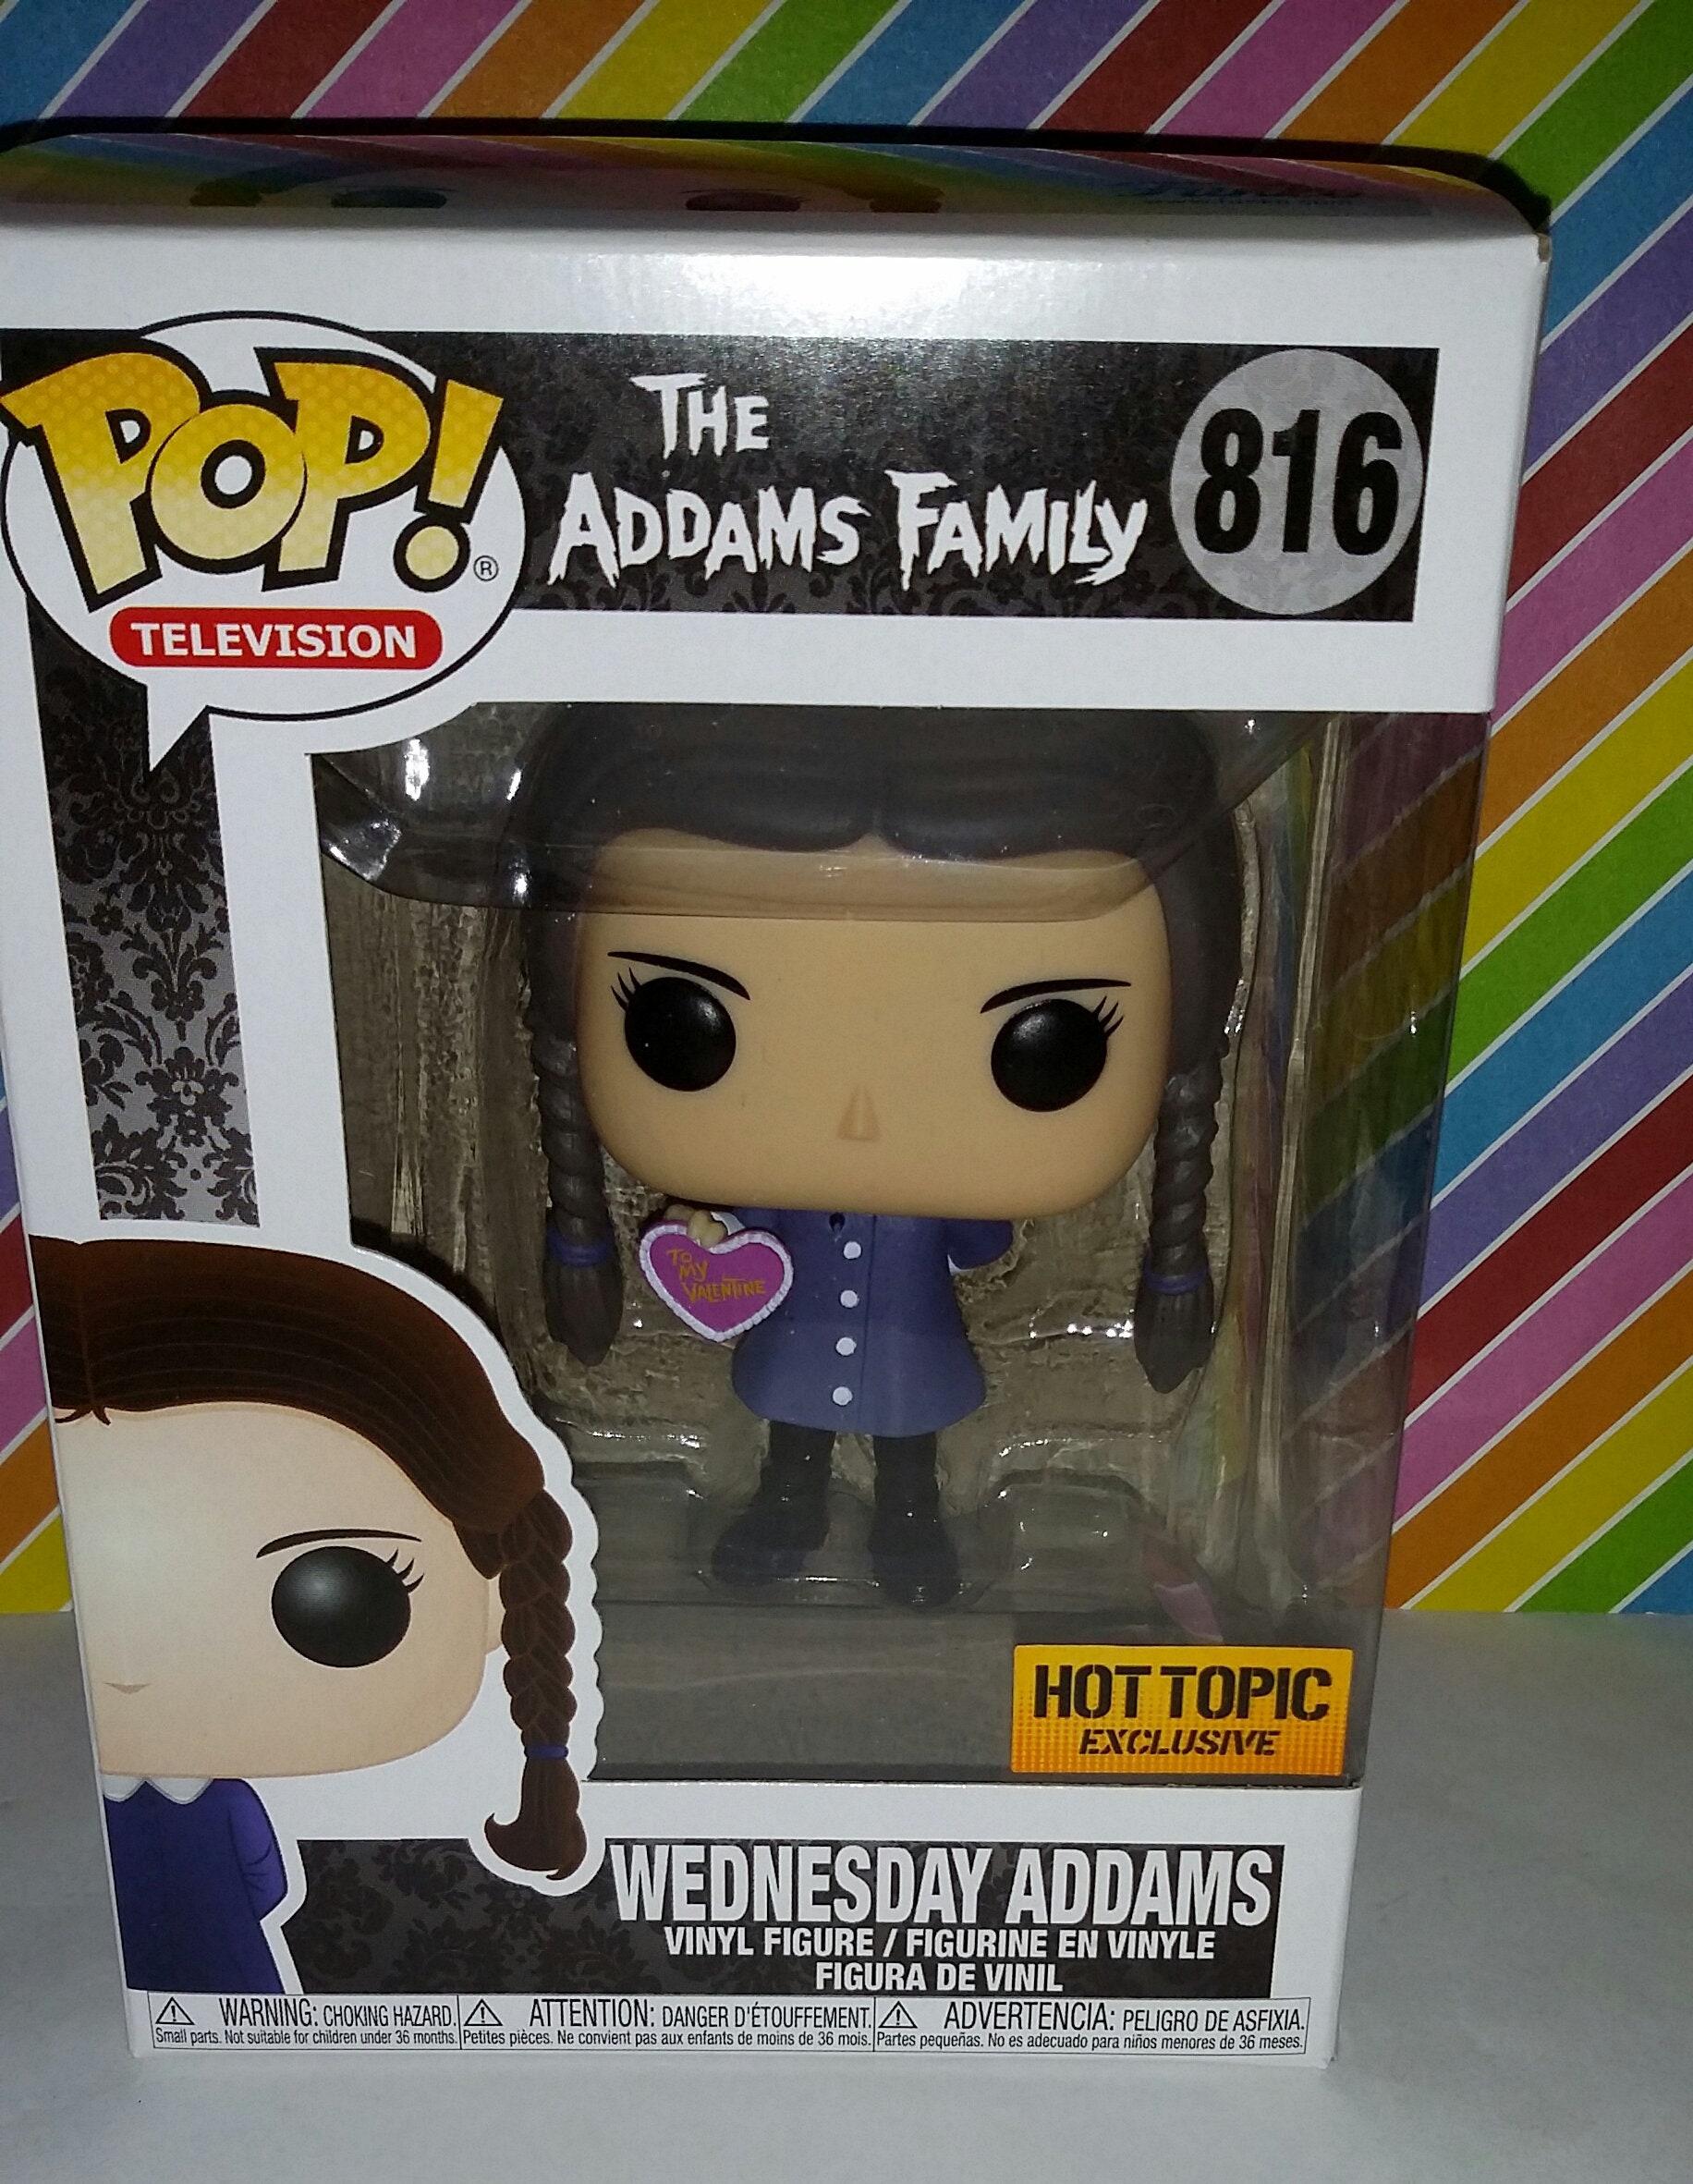 Funko The Addams Family POP Television Wednesday Addams Exclusive